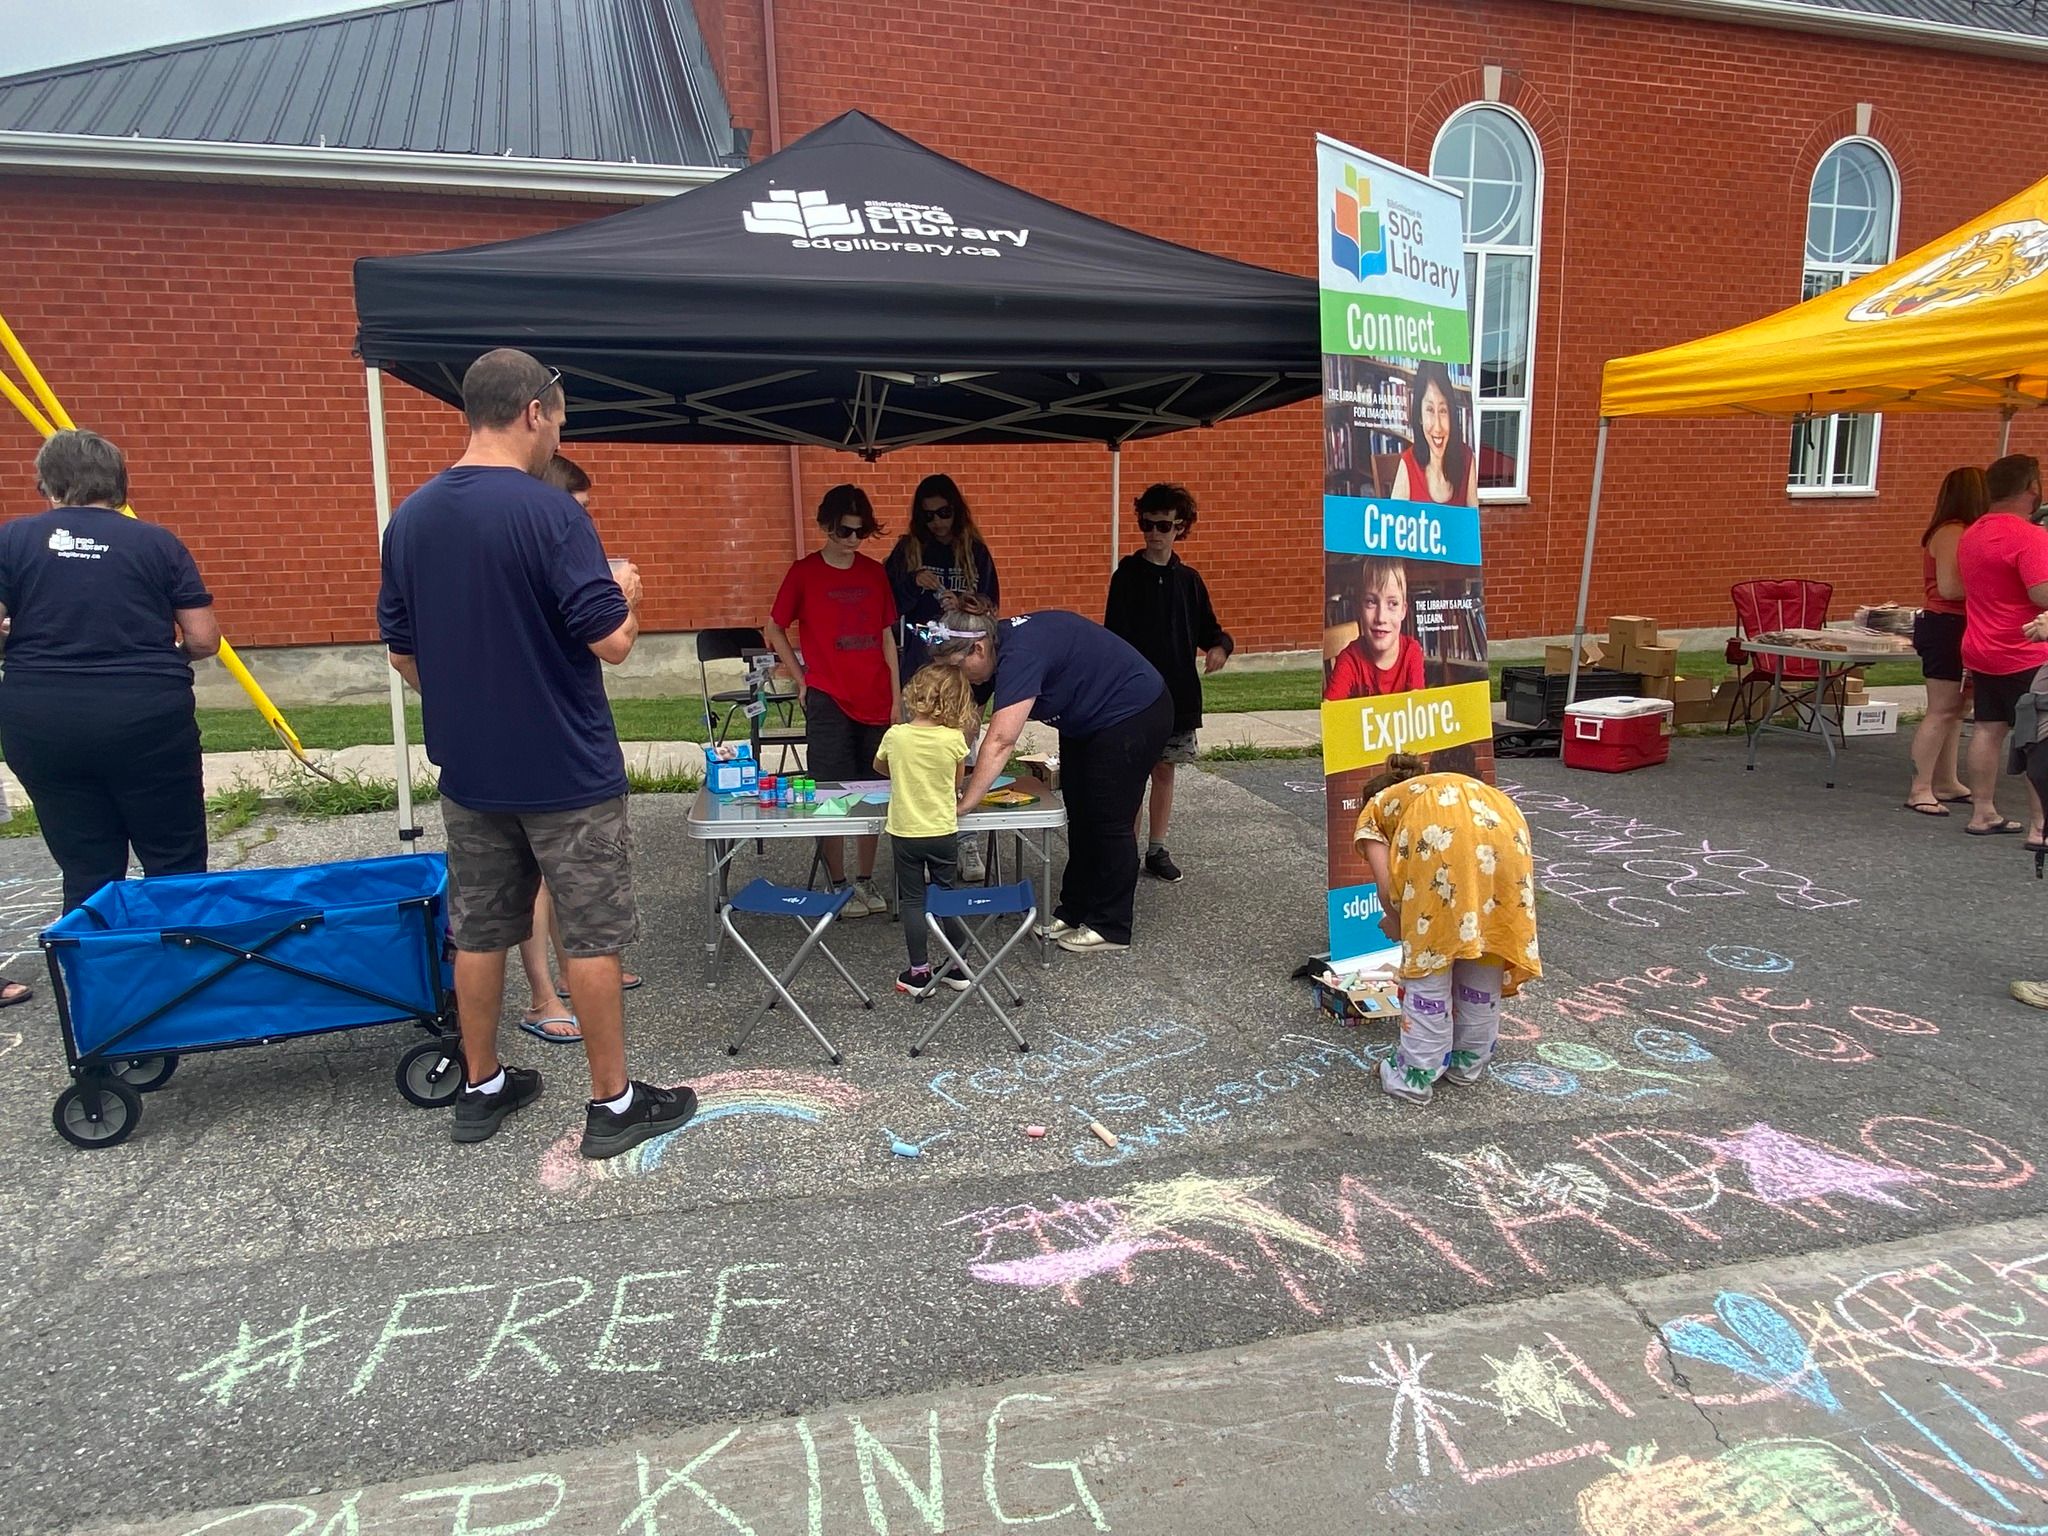 sdg library booth at street party